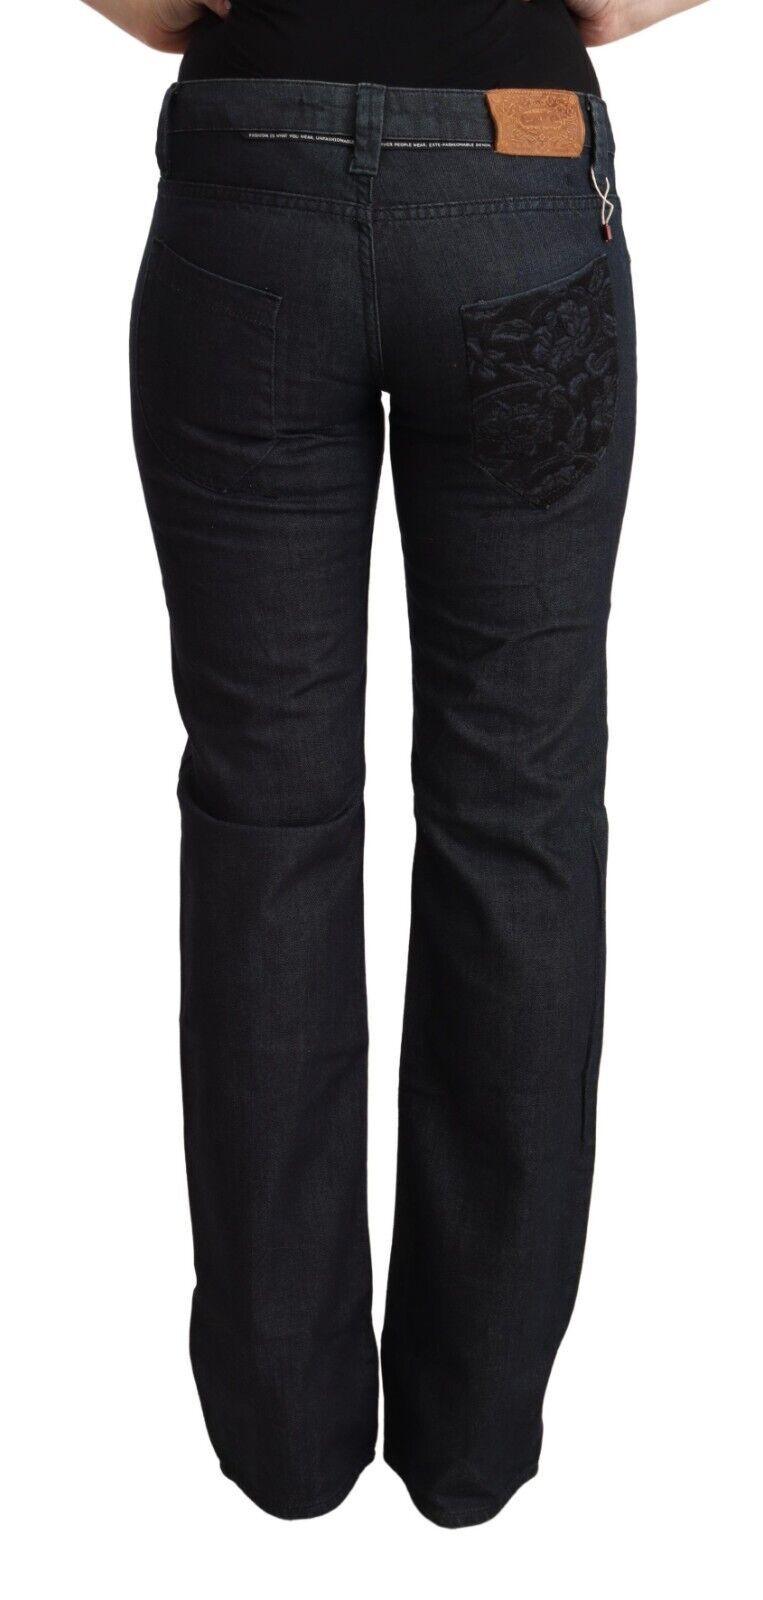 Exte Women's Dark Blue Cotton Stretch Low Waist Straight Denim Jeans - Designed by Exte Available to Buy at a Discounted Price on Moon Behind The Hill Online Designer Discount Store